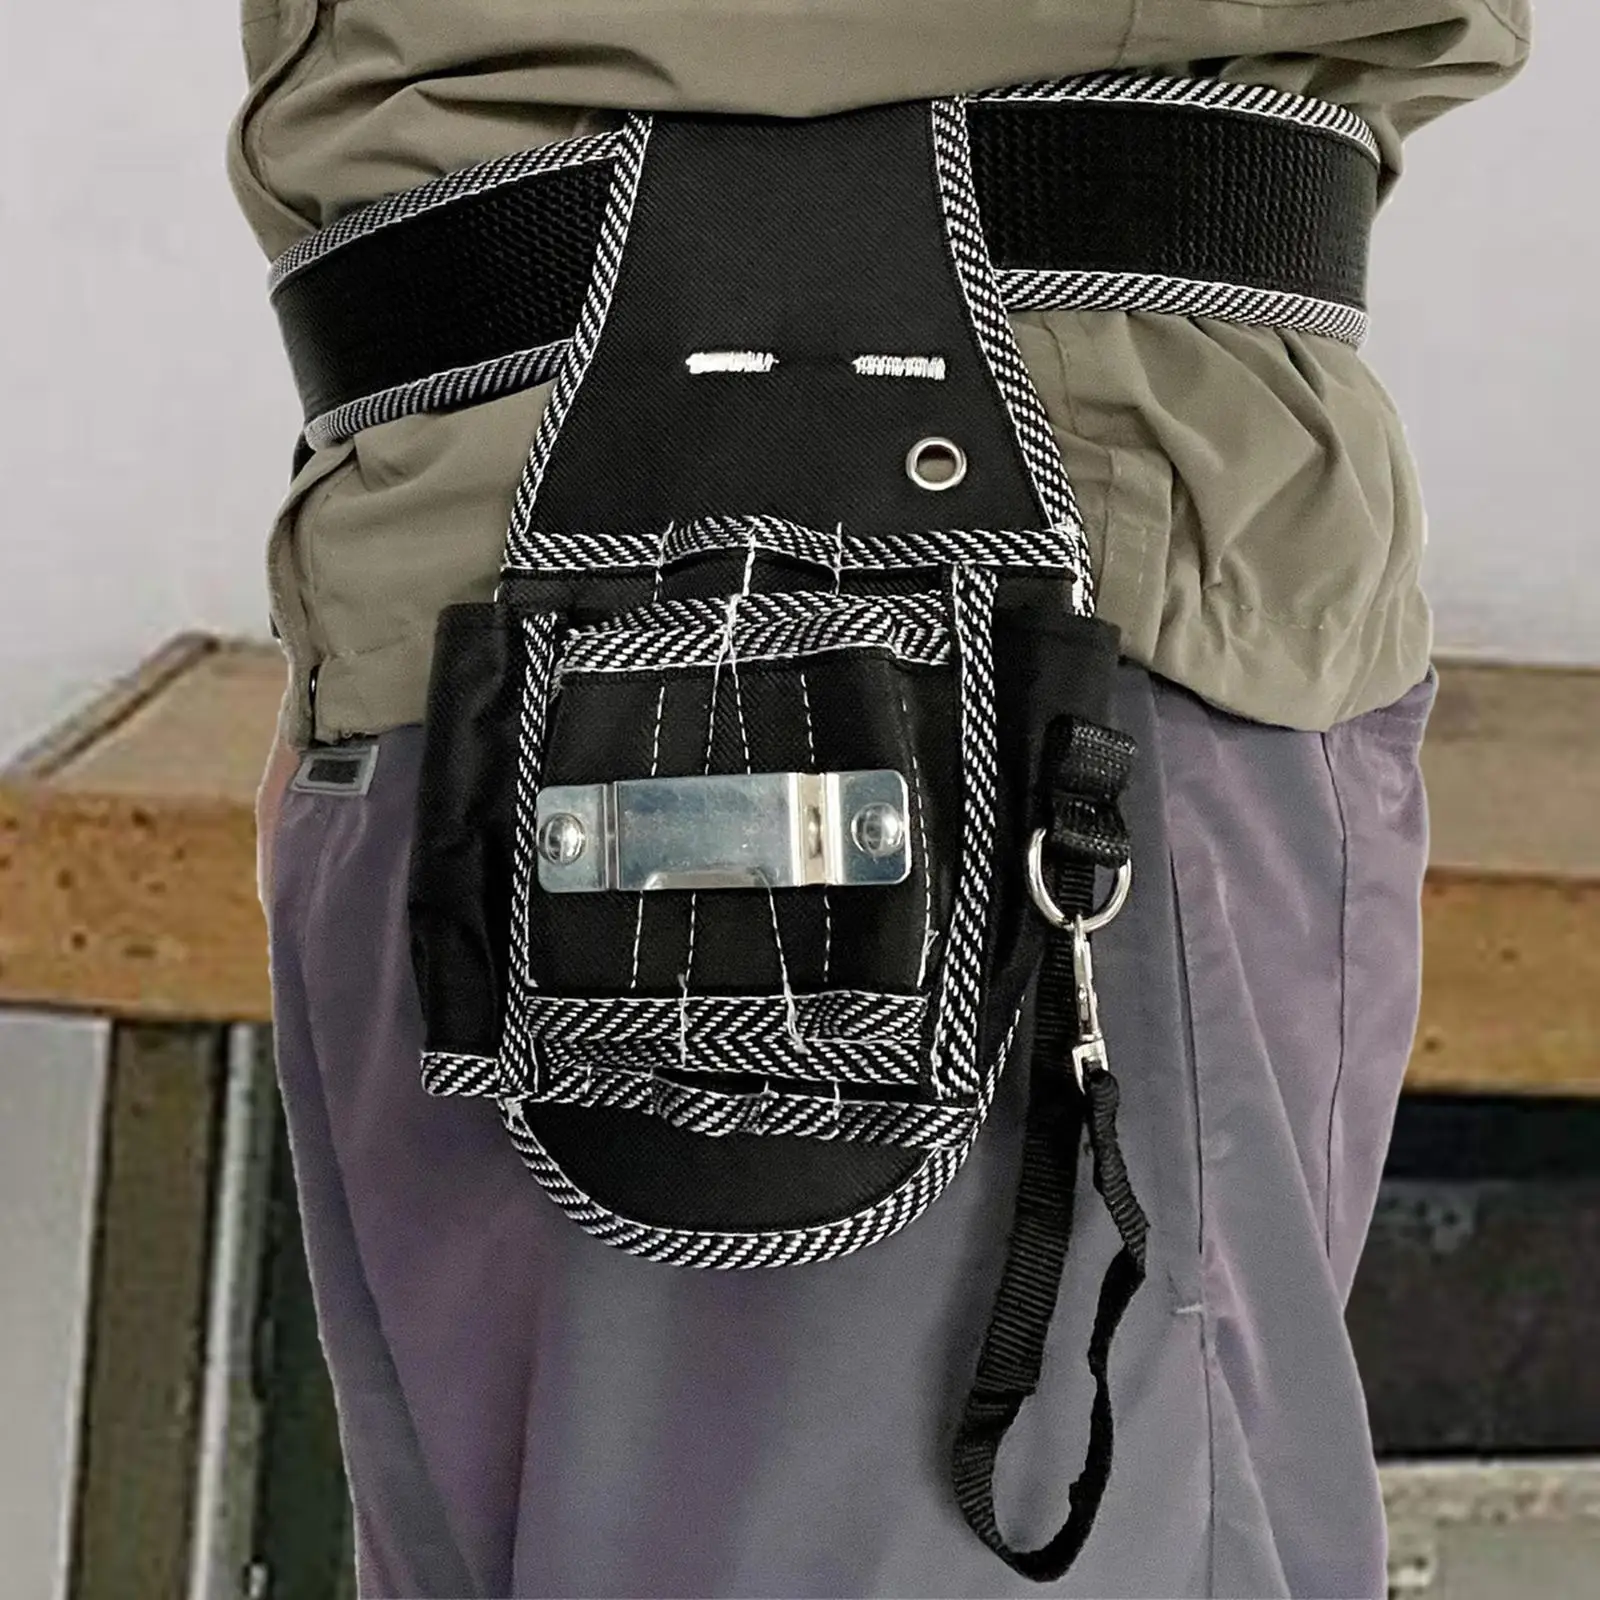 Multifunctional Tool Pouch Bag with Belt Adjustable Waist Belt Tool Storage Pouch for Mechanics Home DIY Construction Carpenter